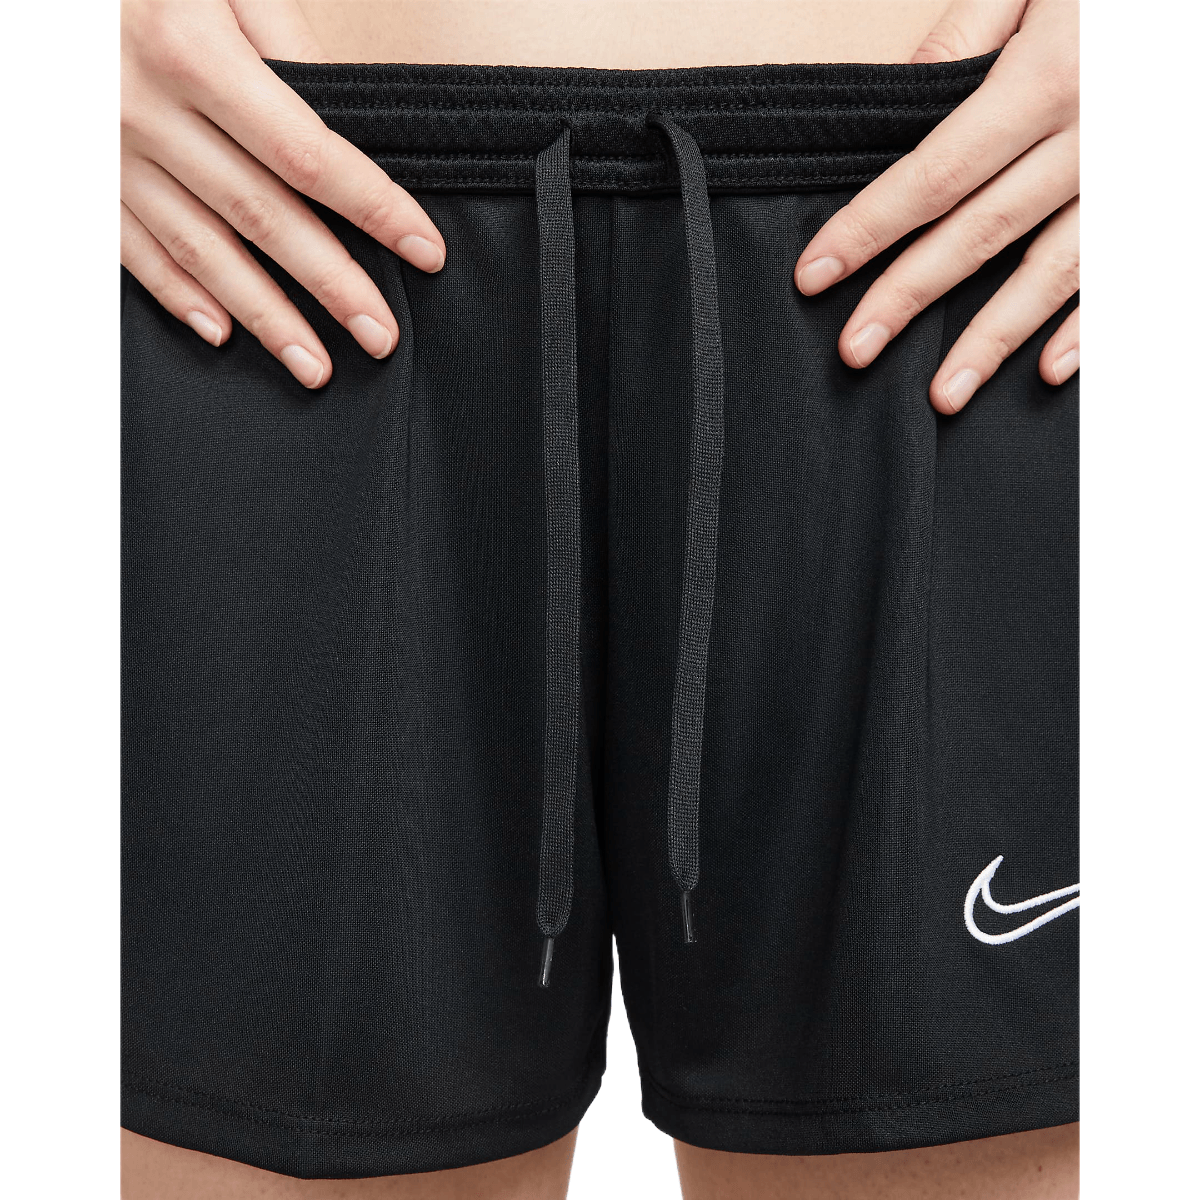 Nike Dri-FIT Academy Knit Soccer Short - Women's - Al's Sporting Goods:  Your One-Stop Shop for Outdoor Sports Gear & Apparel